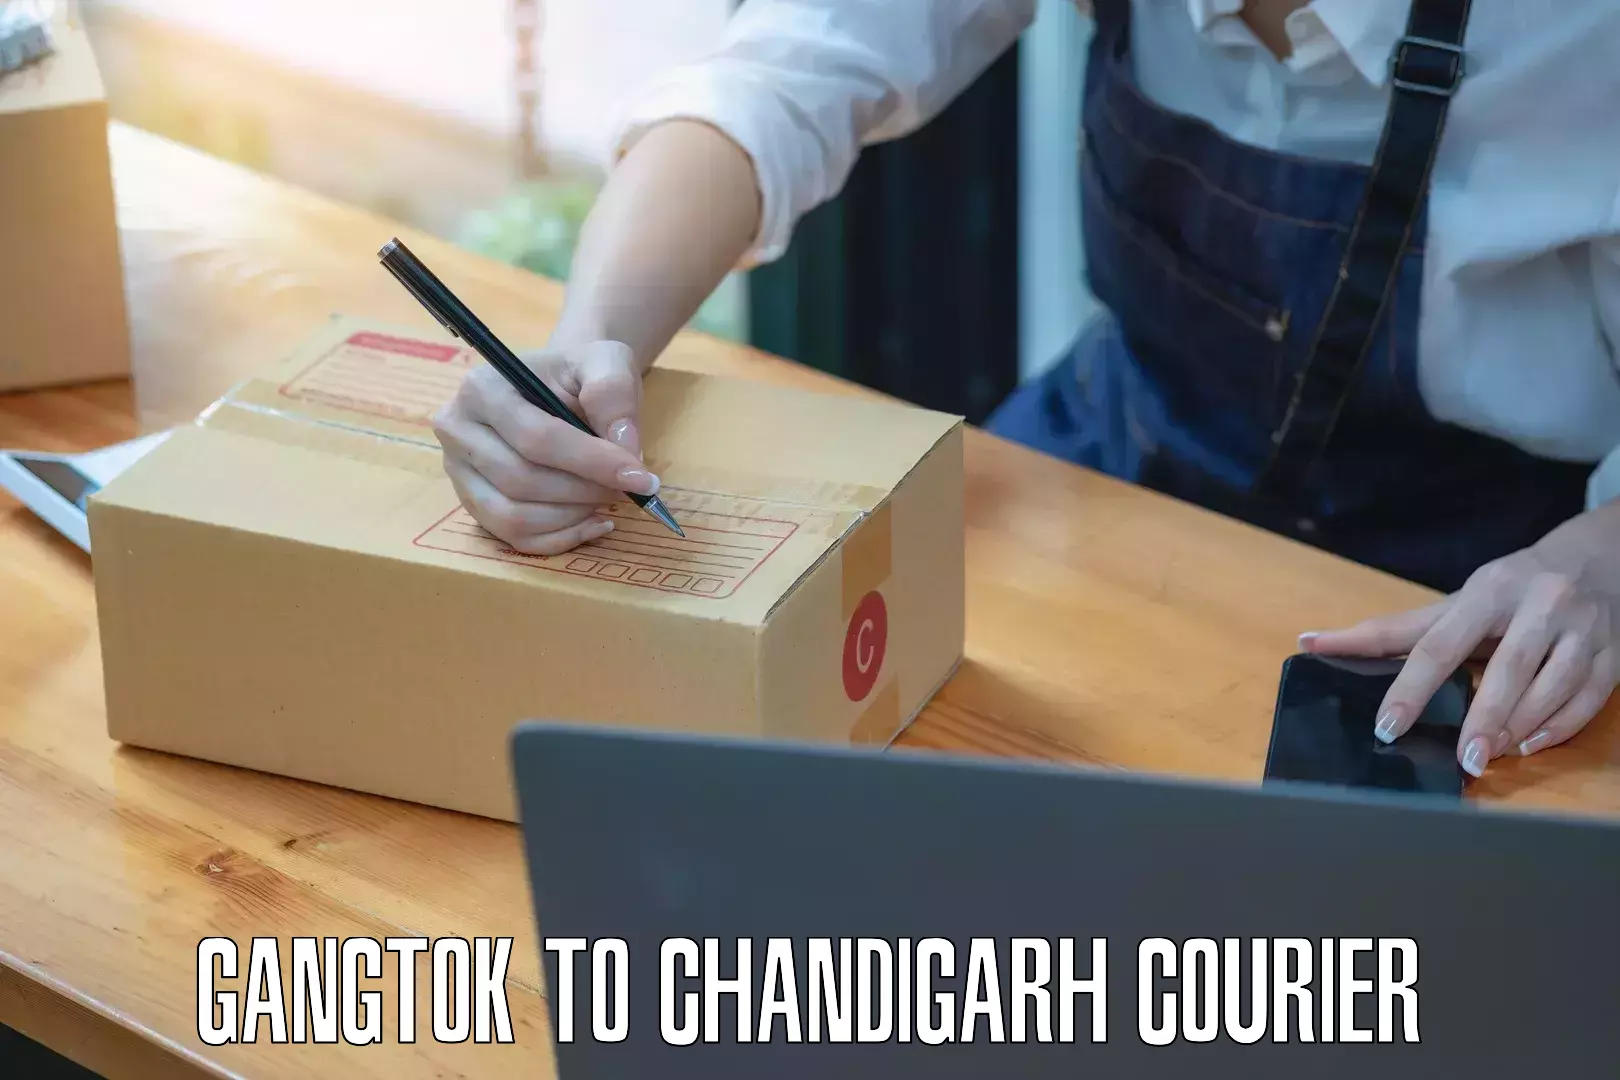 Track and trace shipping Gangtok to Chandigarh